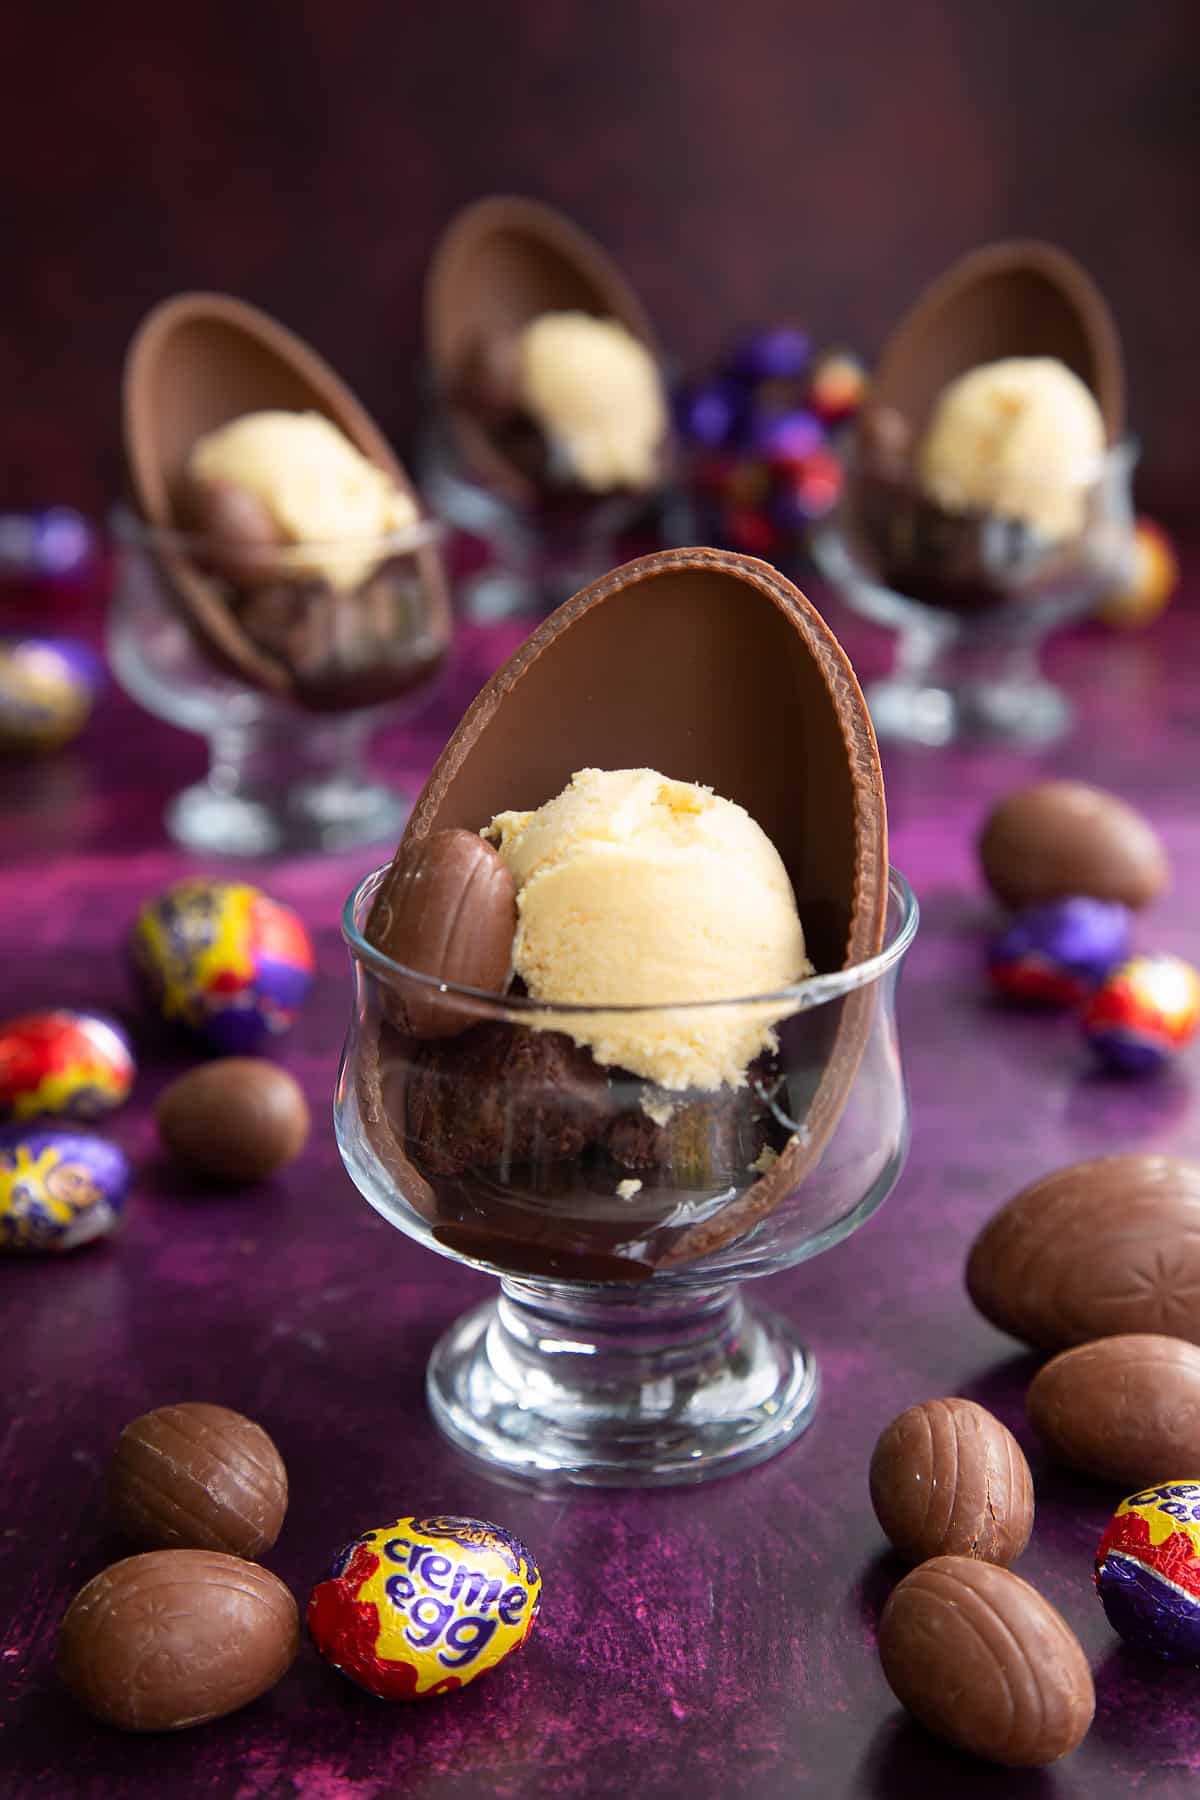 Adding a creme egg to the side of the ice cream ontop of the brownie bites